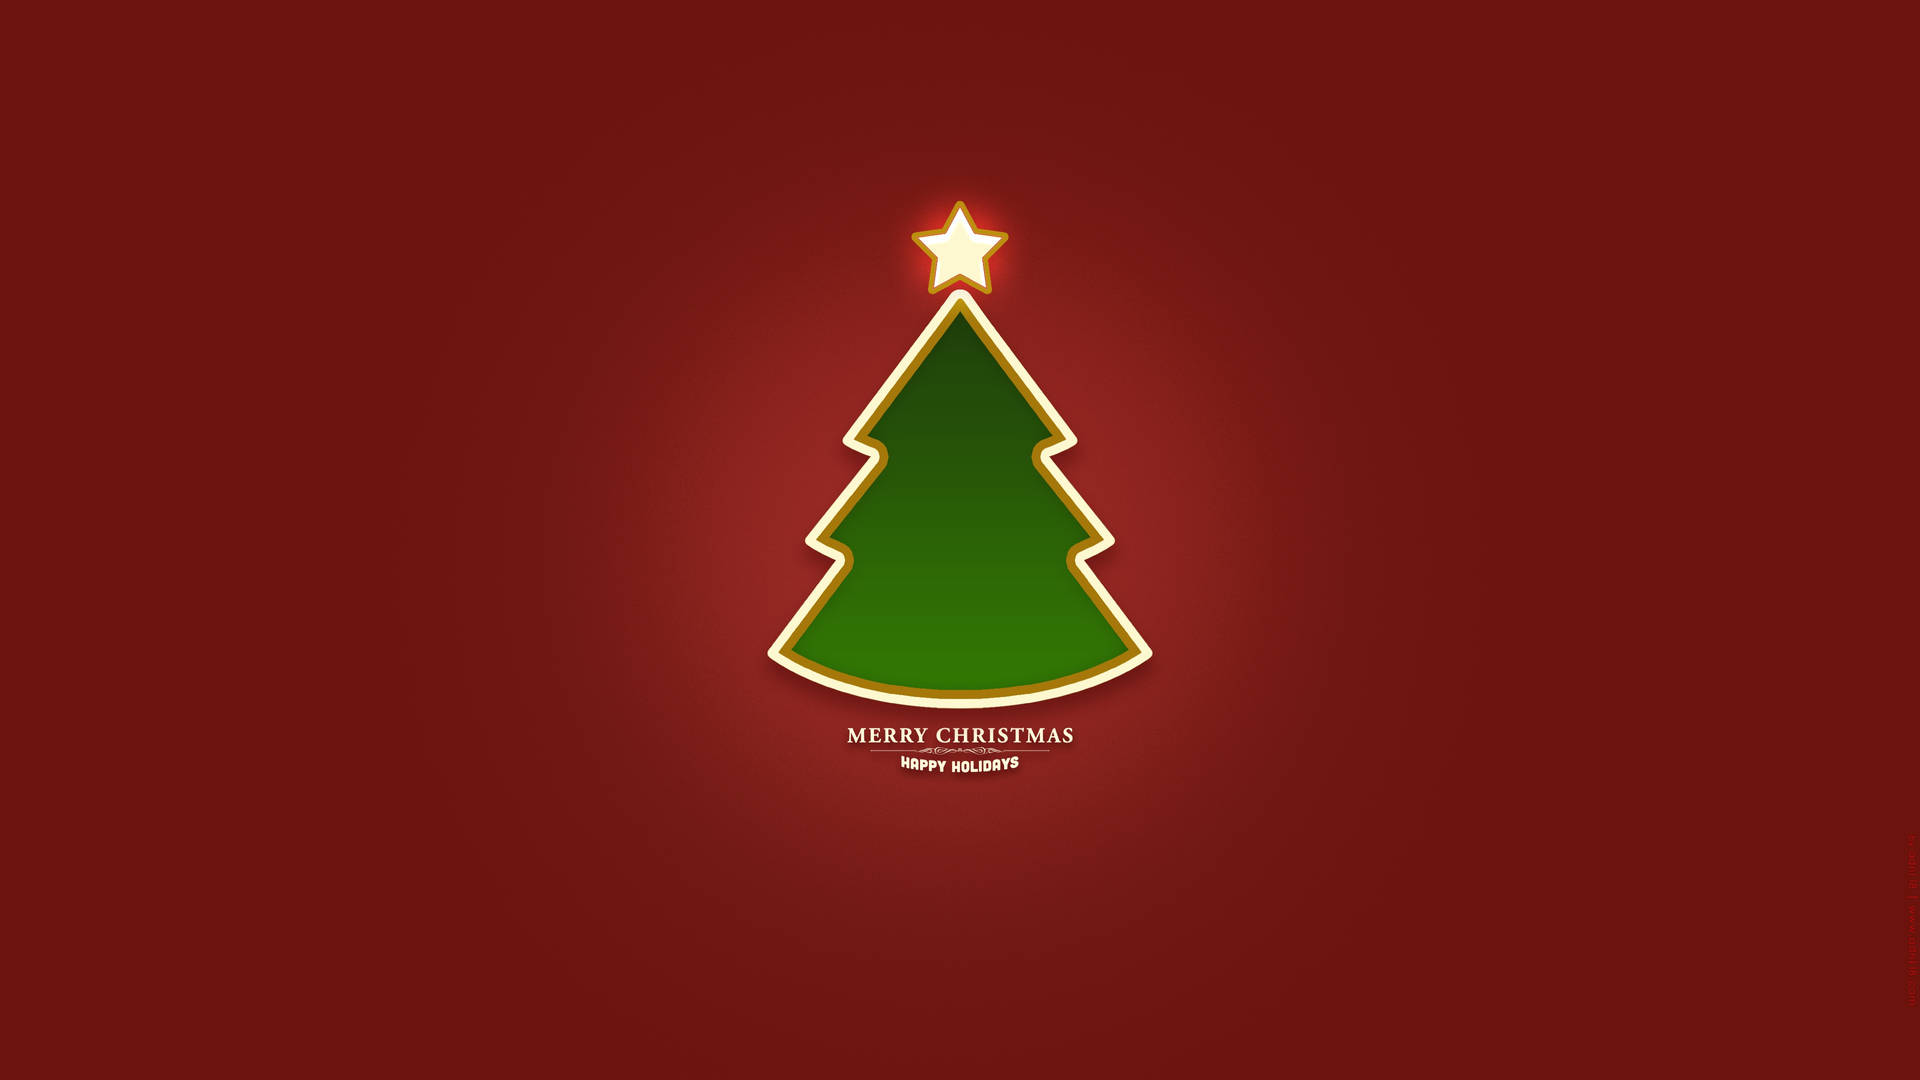 Enjoy the holidays with a minimalist Christmas Wallpaper